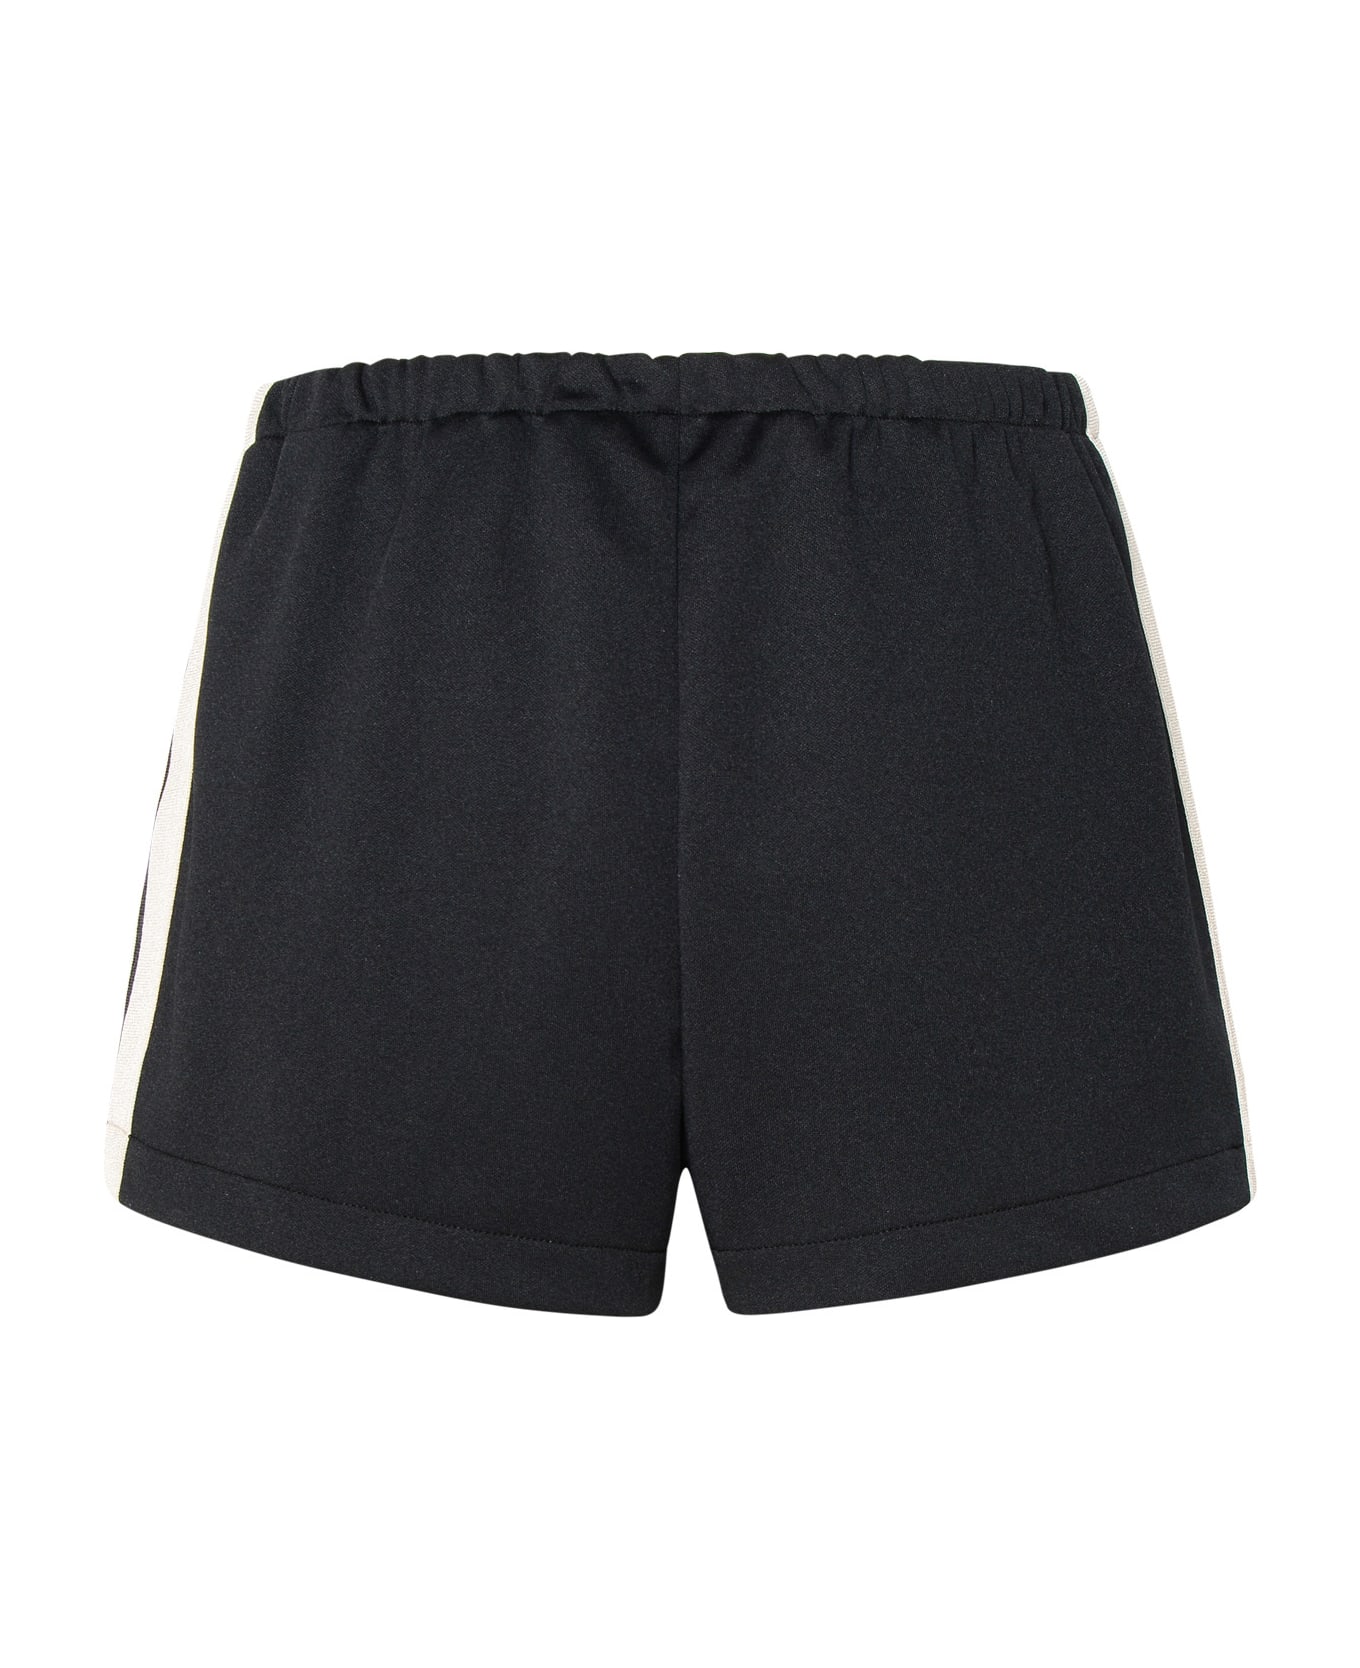 Palm Angels Black Polyester Sporty Shorts - Black off